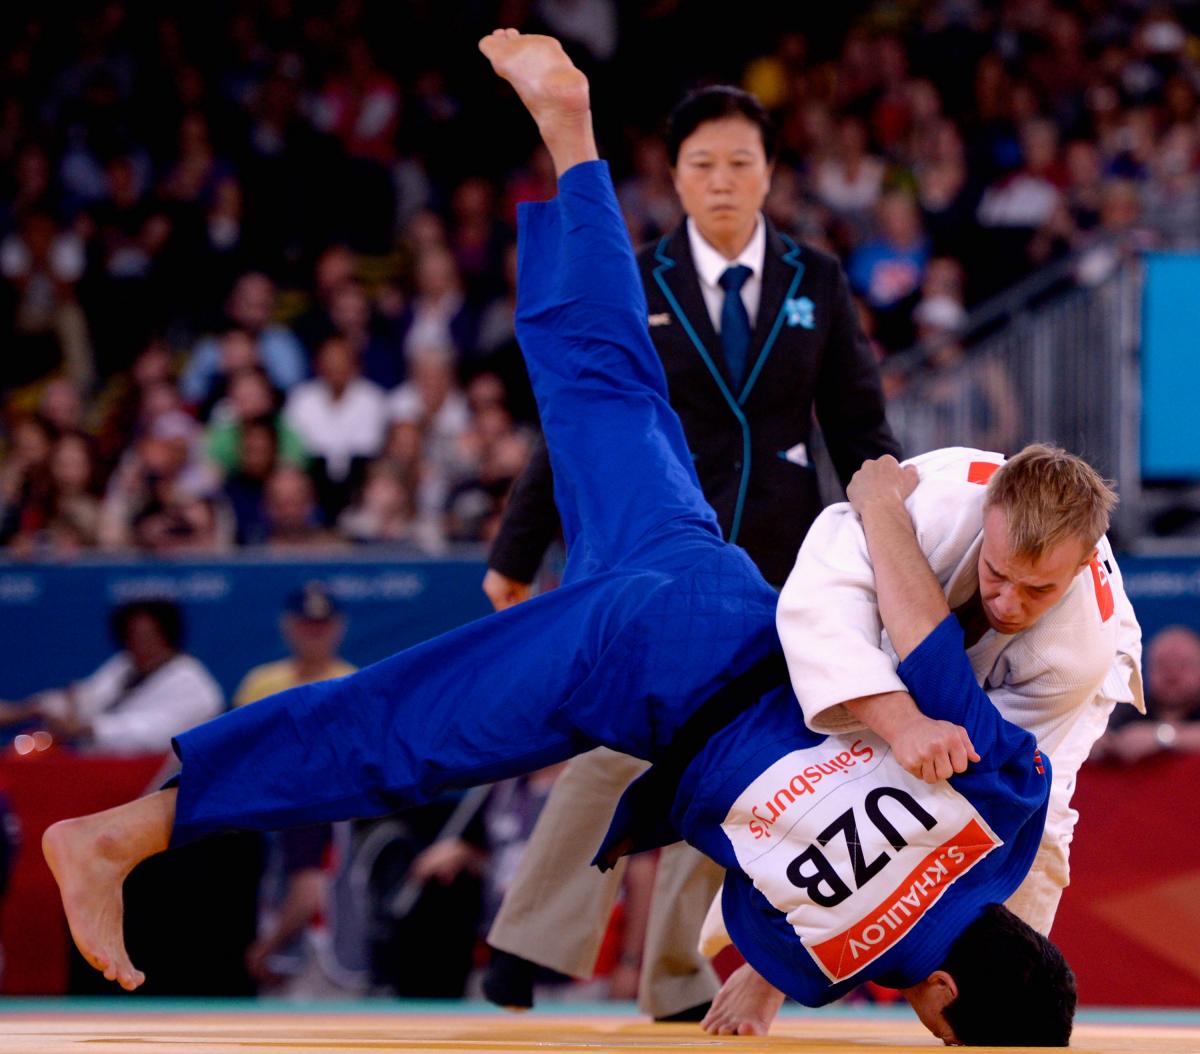 Dmytro Solovey of Ukraine and Sharif Khalilov of Uzbekistan compete in the Men's 73kg Gold Medal Contest at the London 2012 Paralympic Games